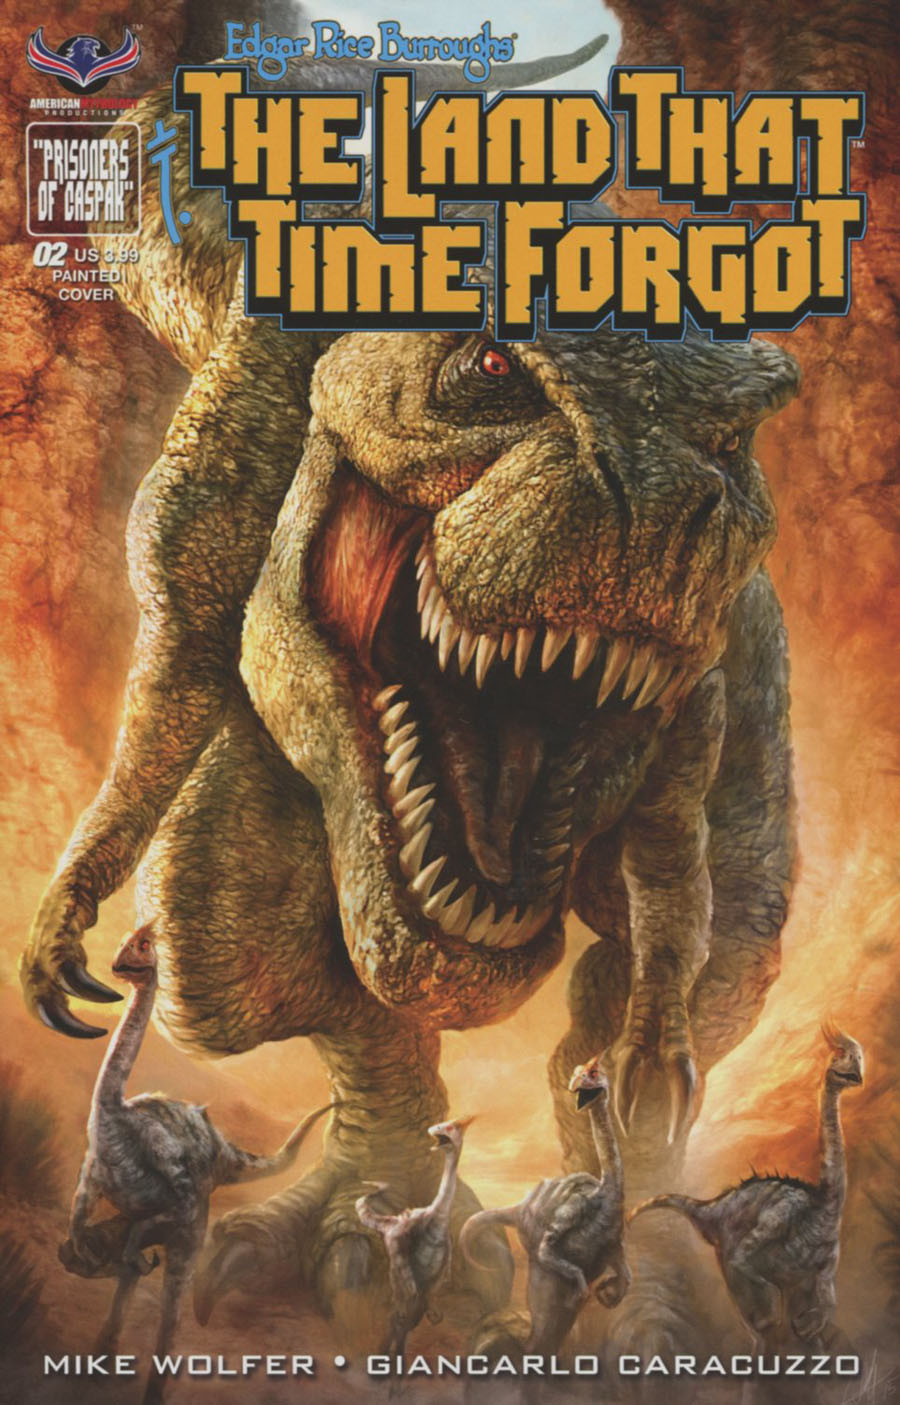 Edgar Rice Burroughs Land That Time Forgot #2 Cover B Variant Chris Scalf Painted Subscription Cover